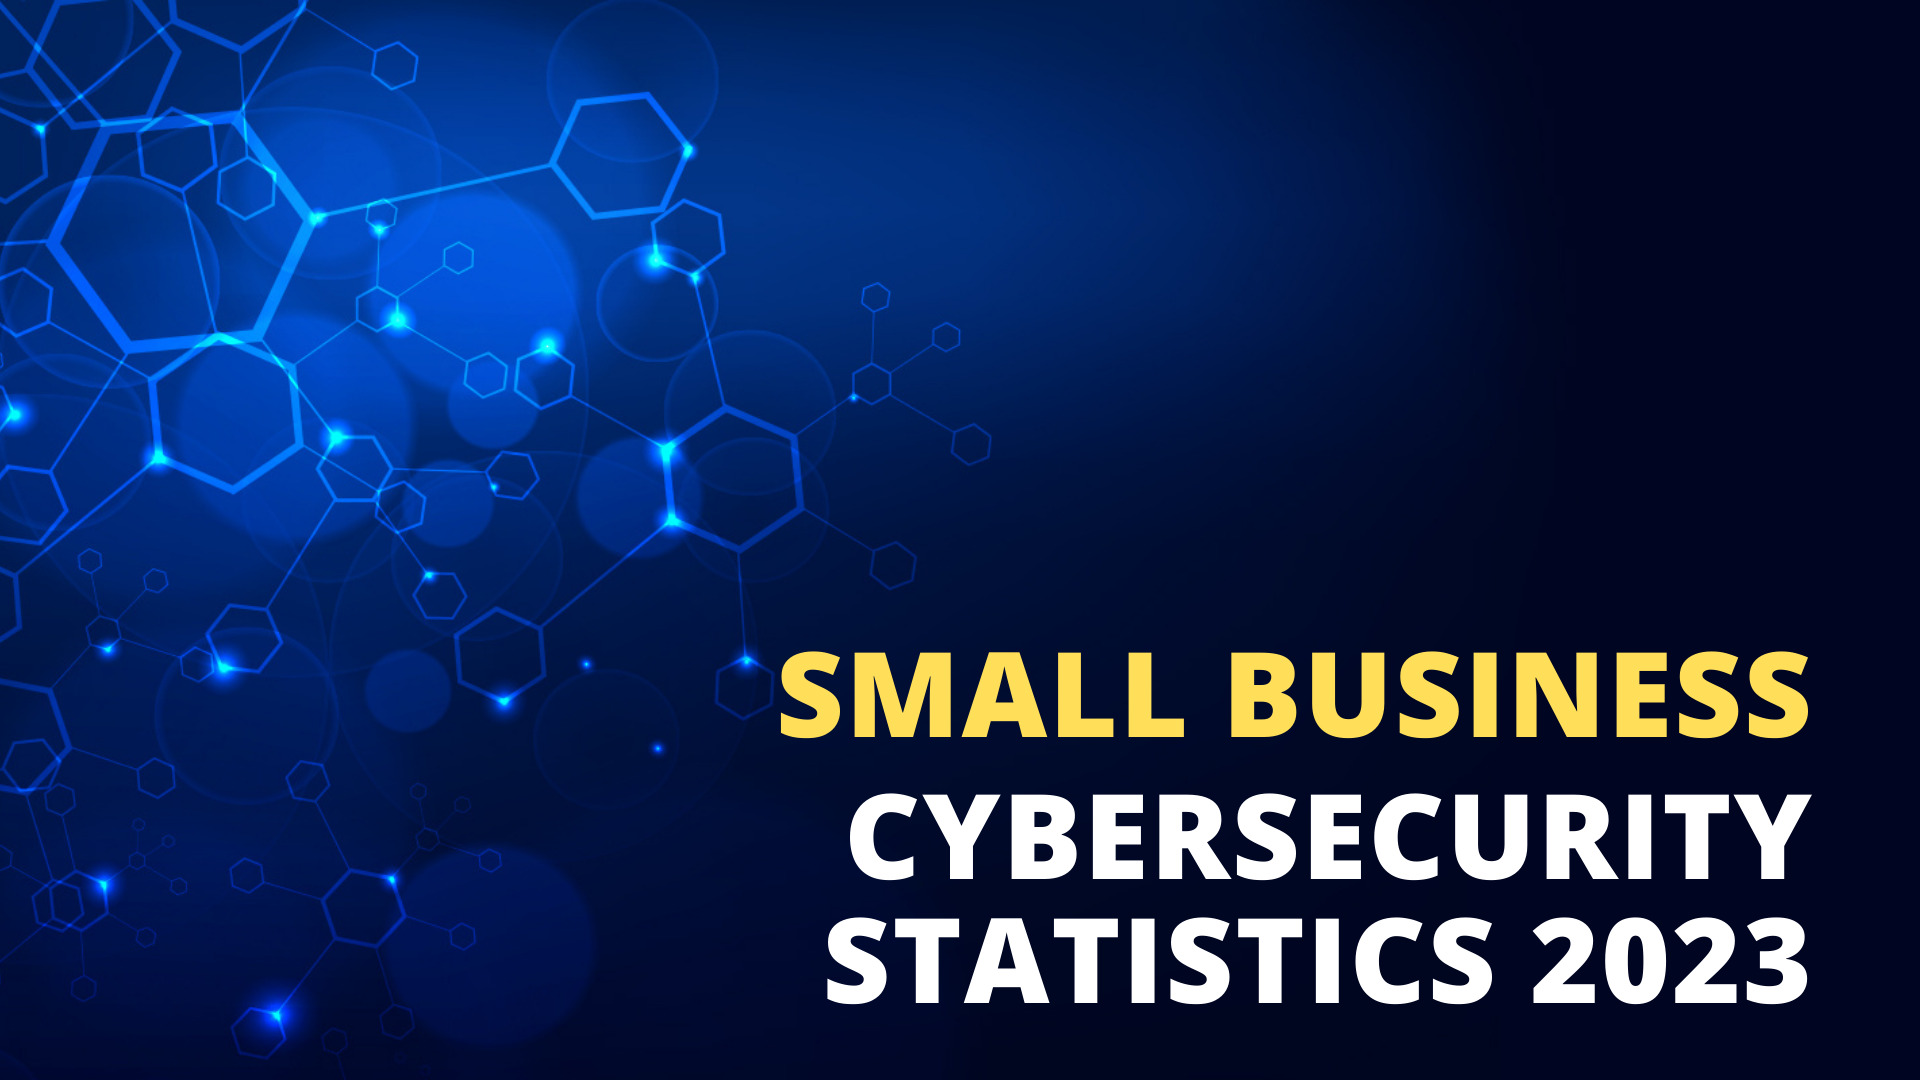 Small Business Cyber Security Statistics